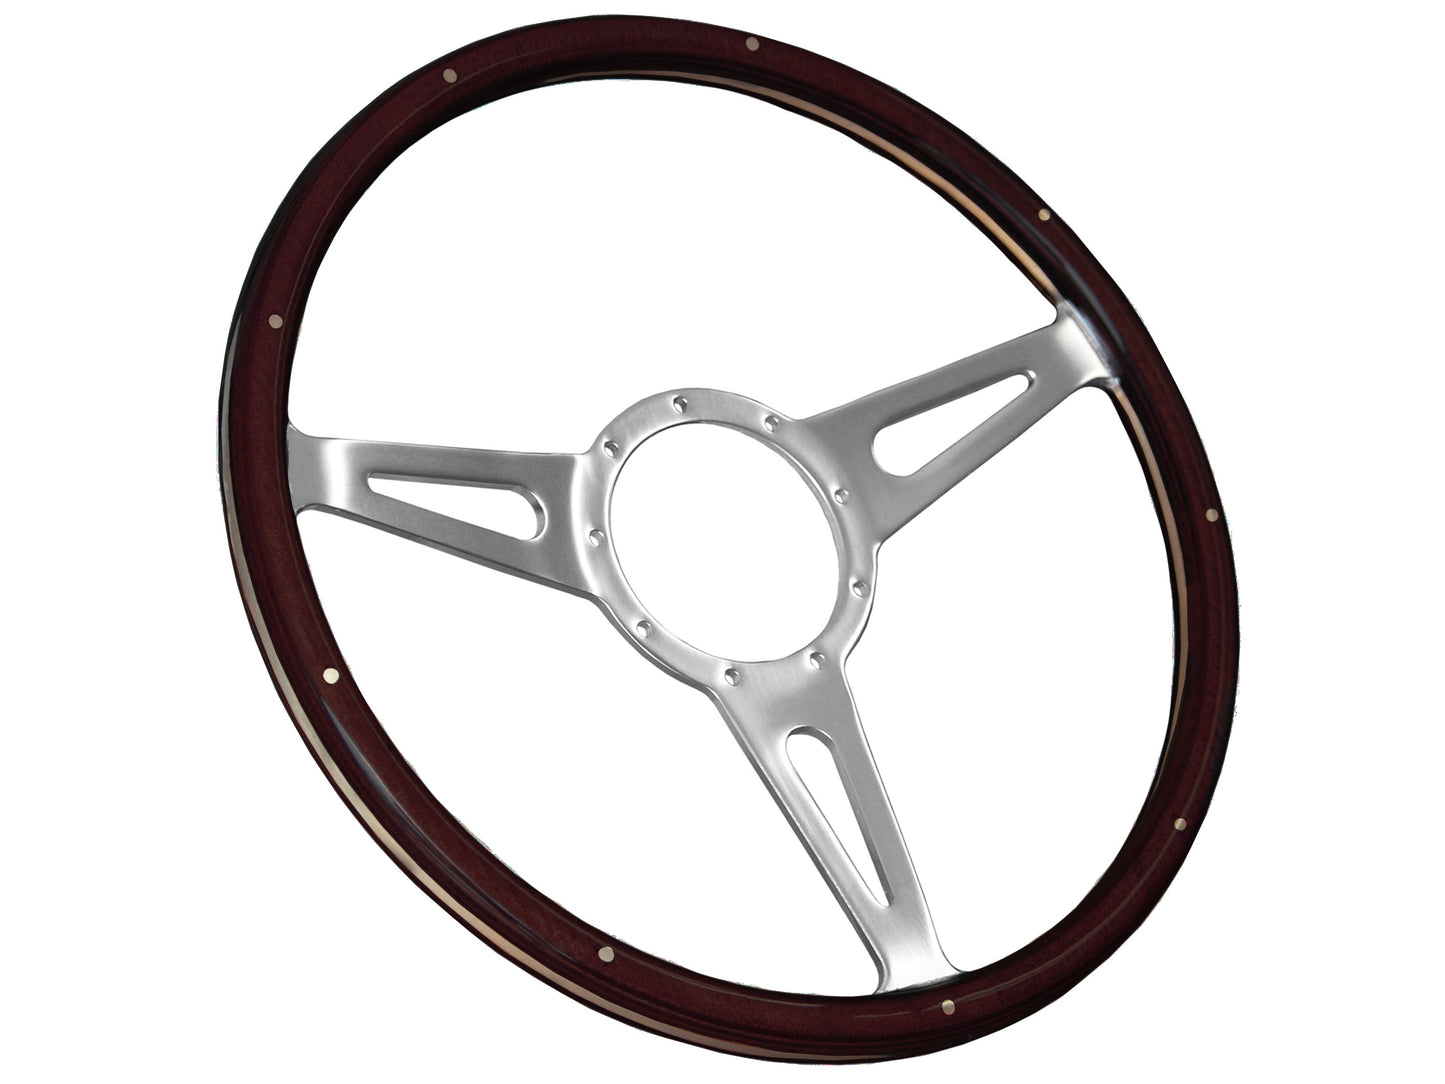 1961-65 Ford Truck Steering Wheel Kit | Deluxe Espresso Wood | ST3053A